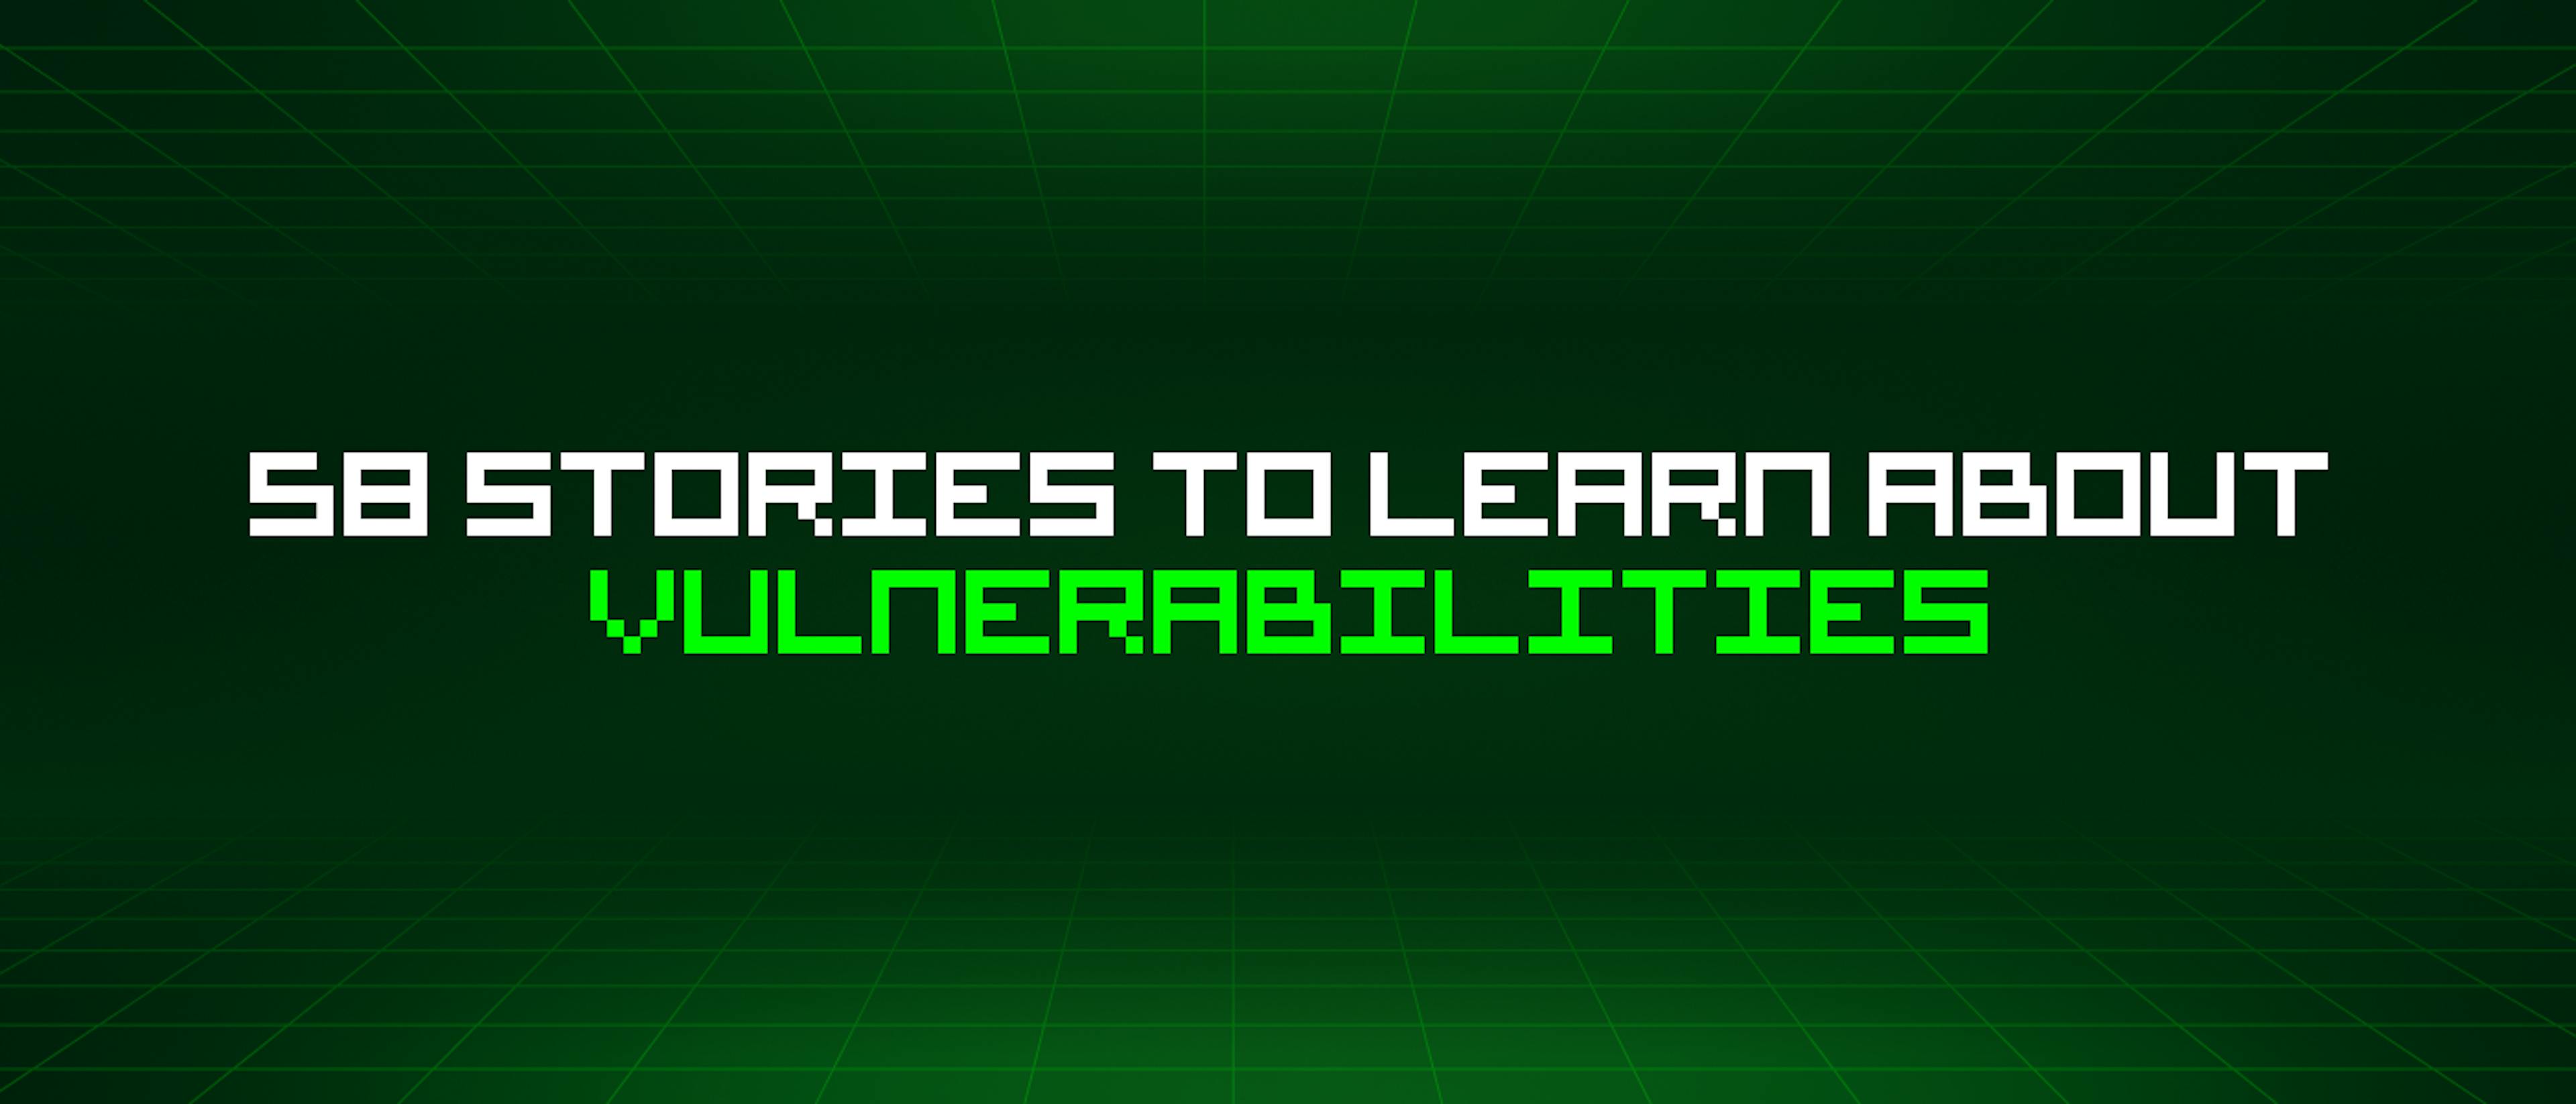 featured image - 58 Stories To Learn About Vulnerabilities